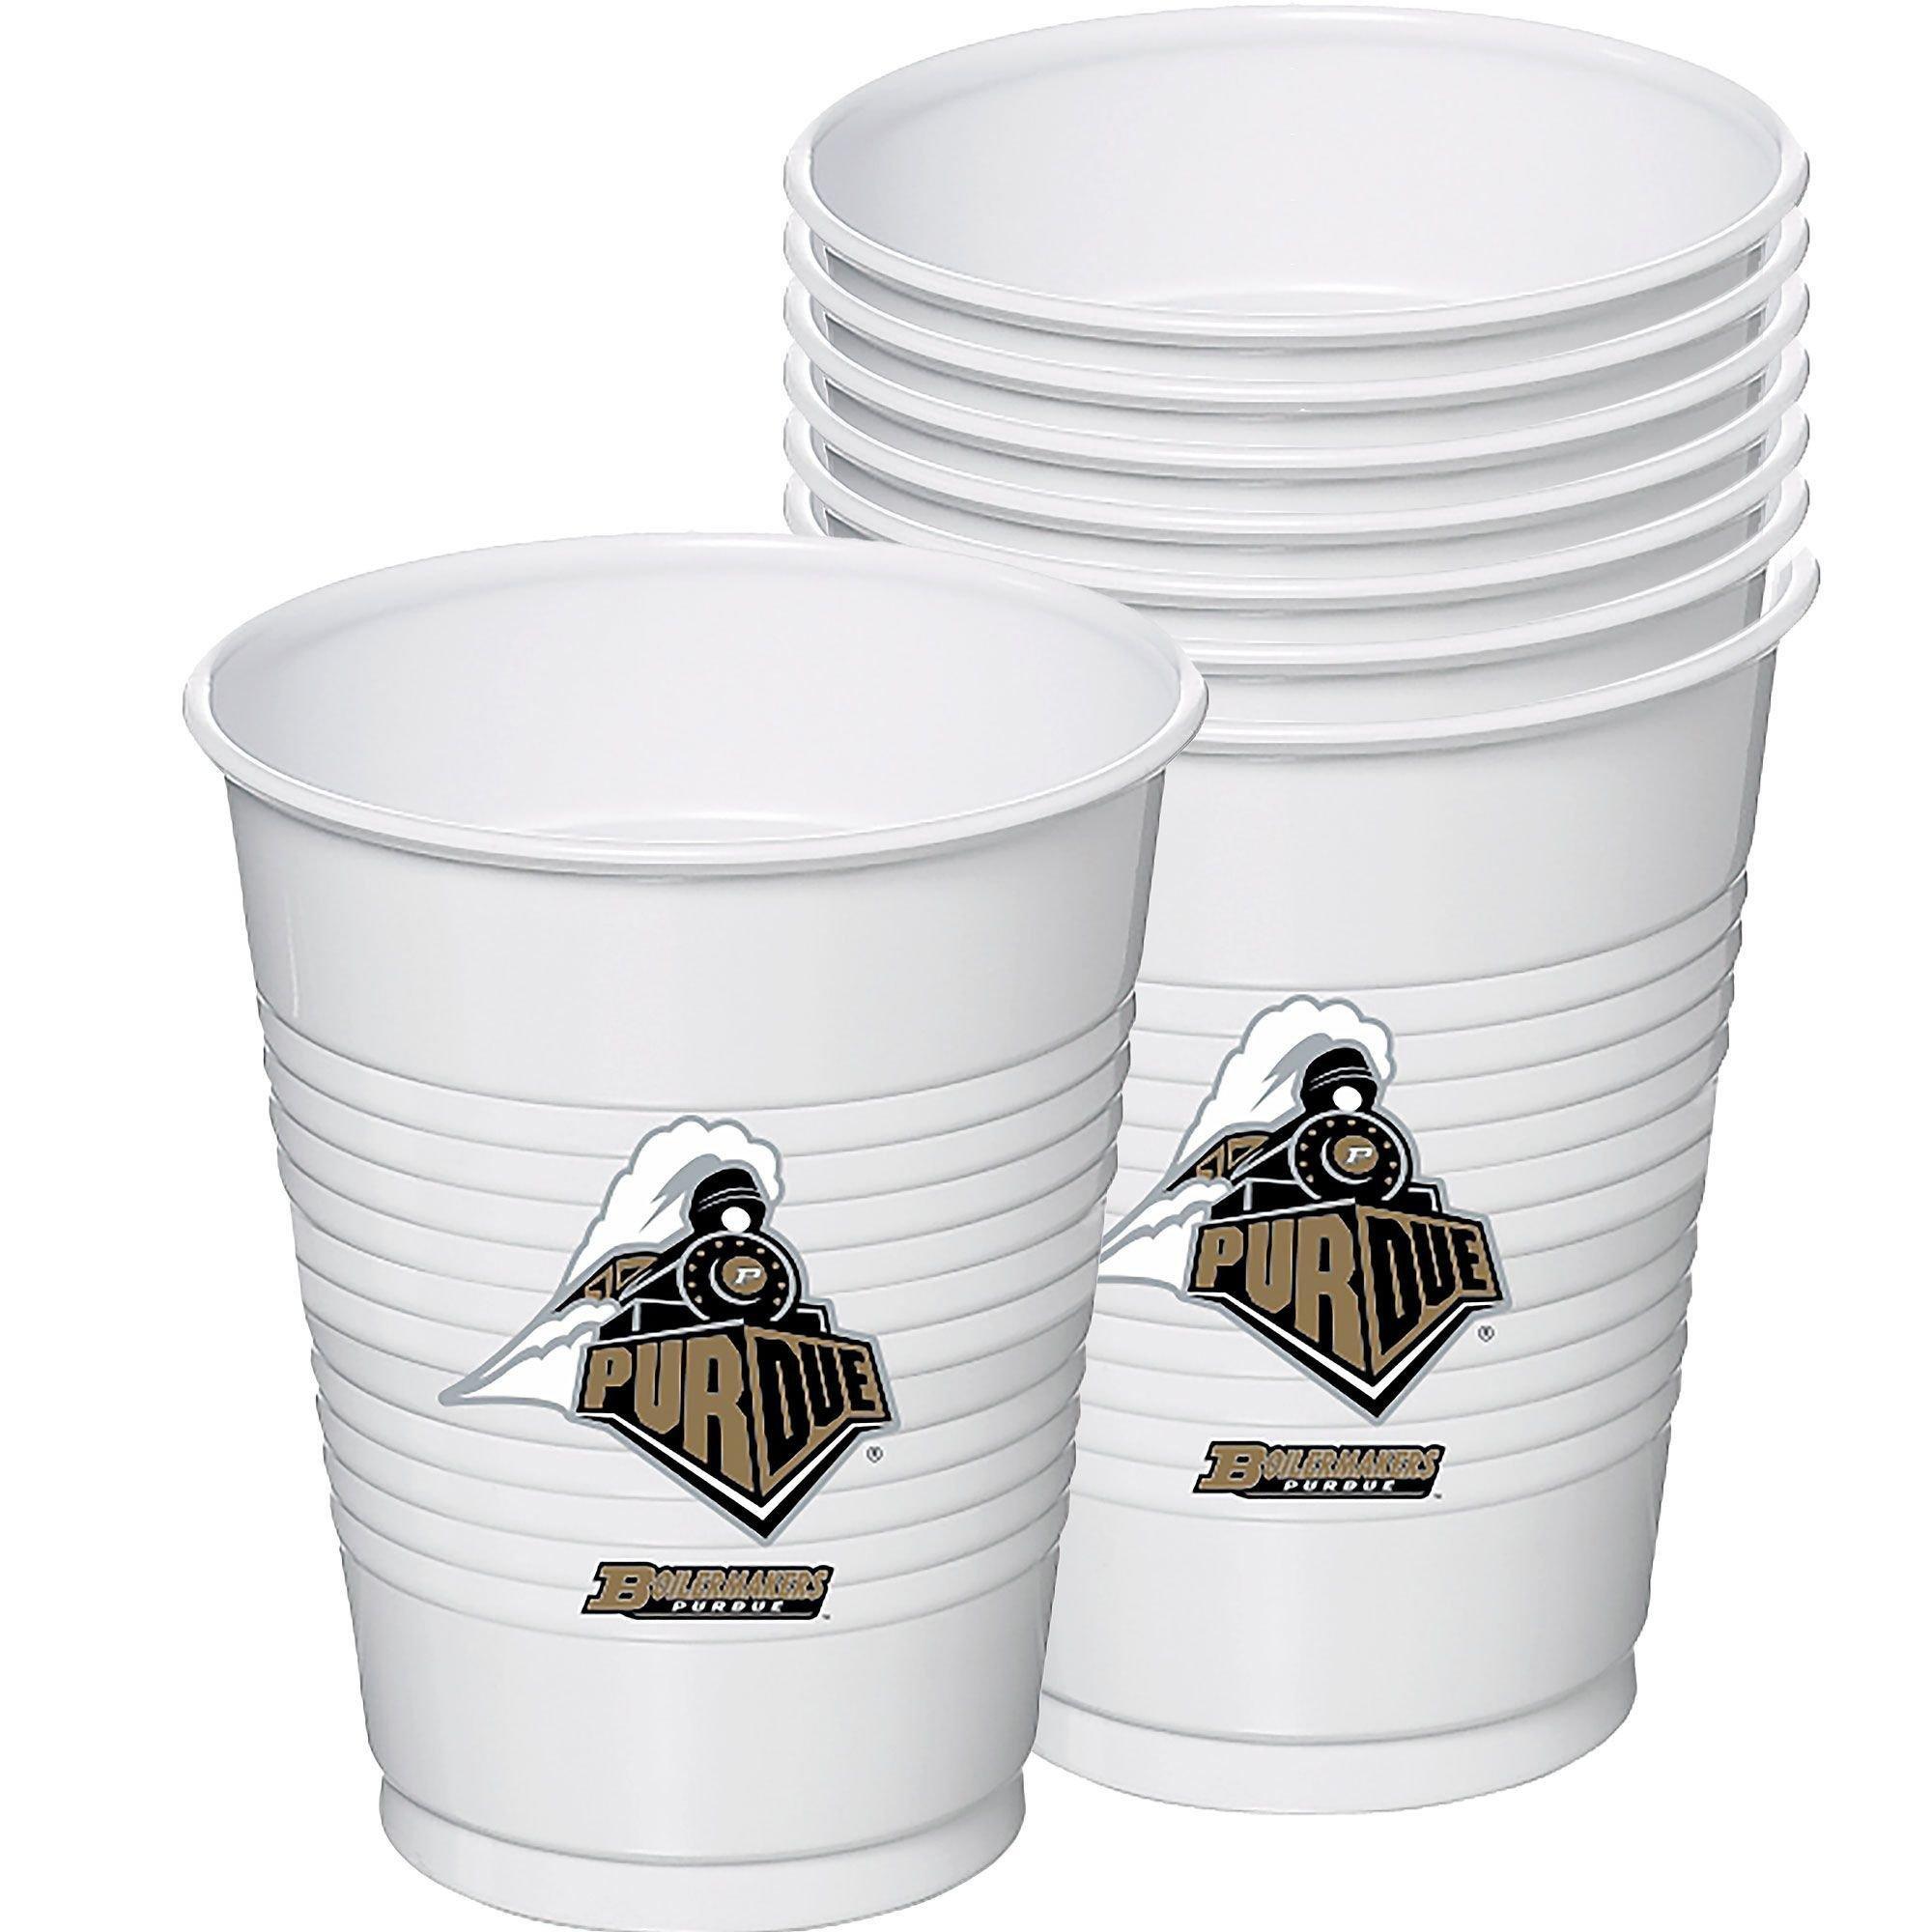 Purdue Boilermakers Party Kit for 40 Guests